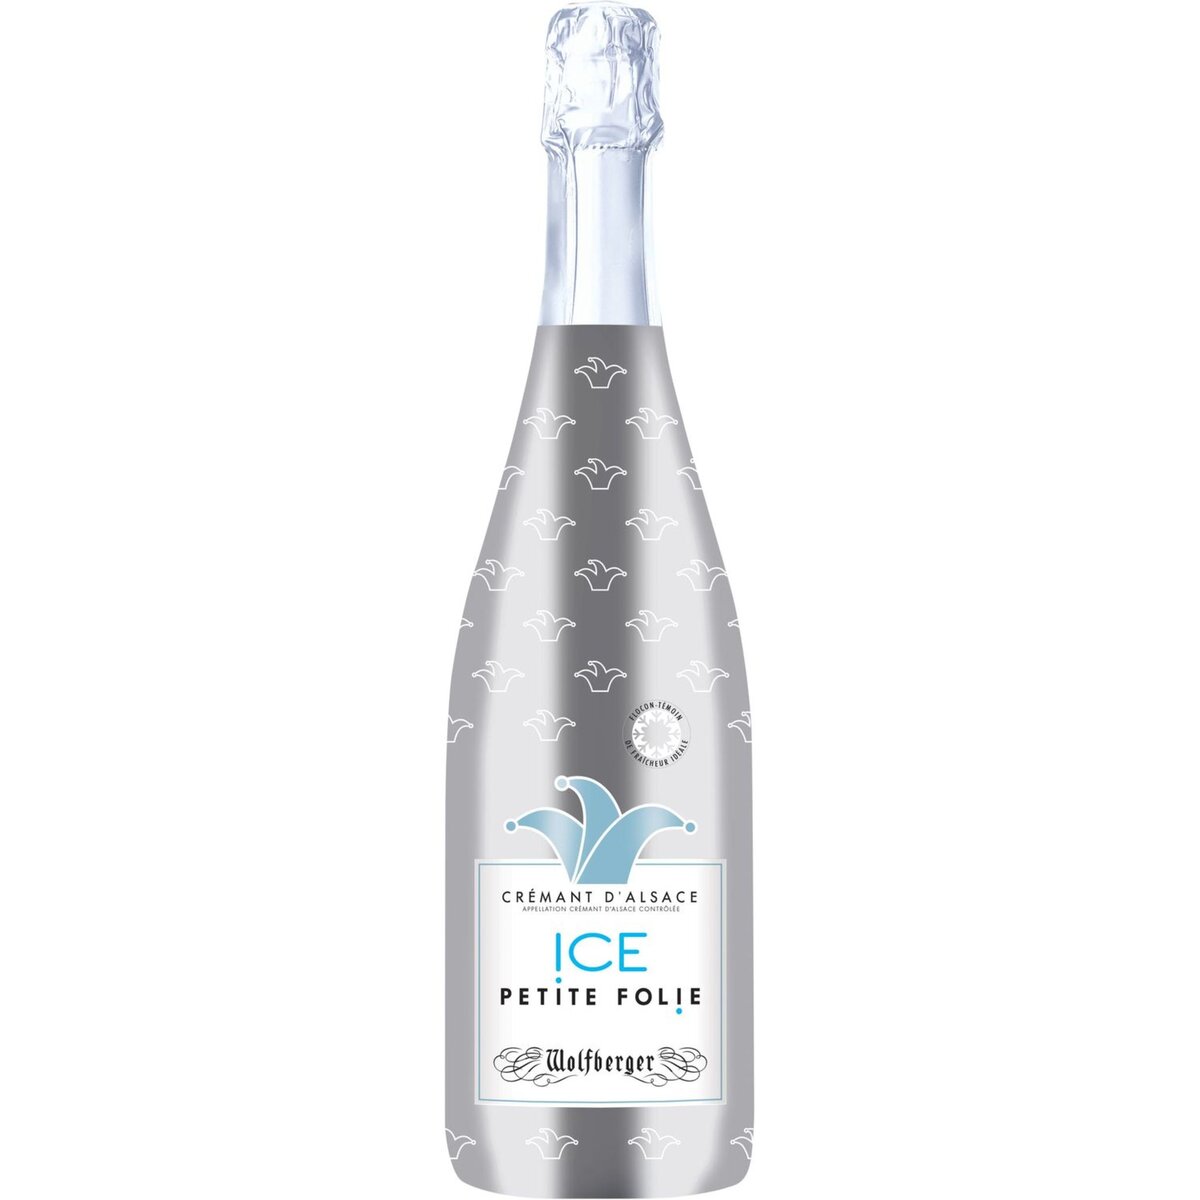 WOLFBERGER CREMANT ICE PETITE FOLIE BLANC WOLFBERGER 75CL 75cl